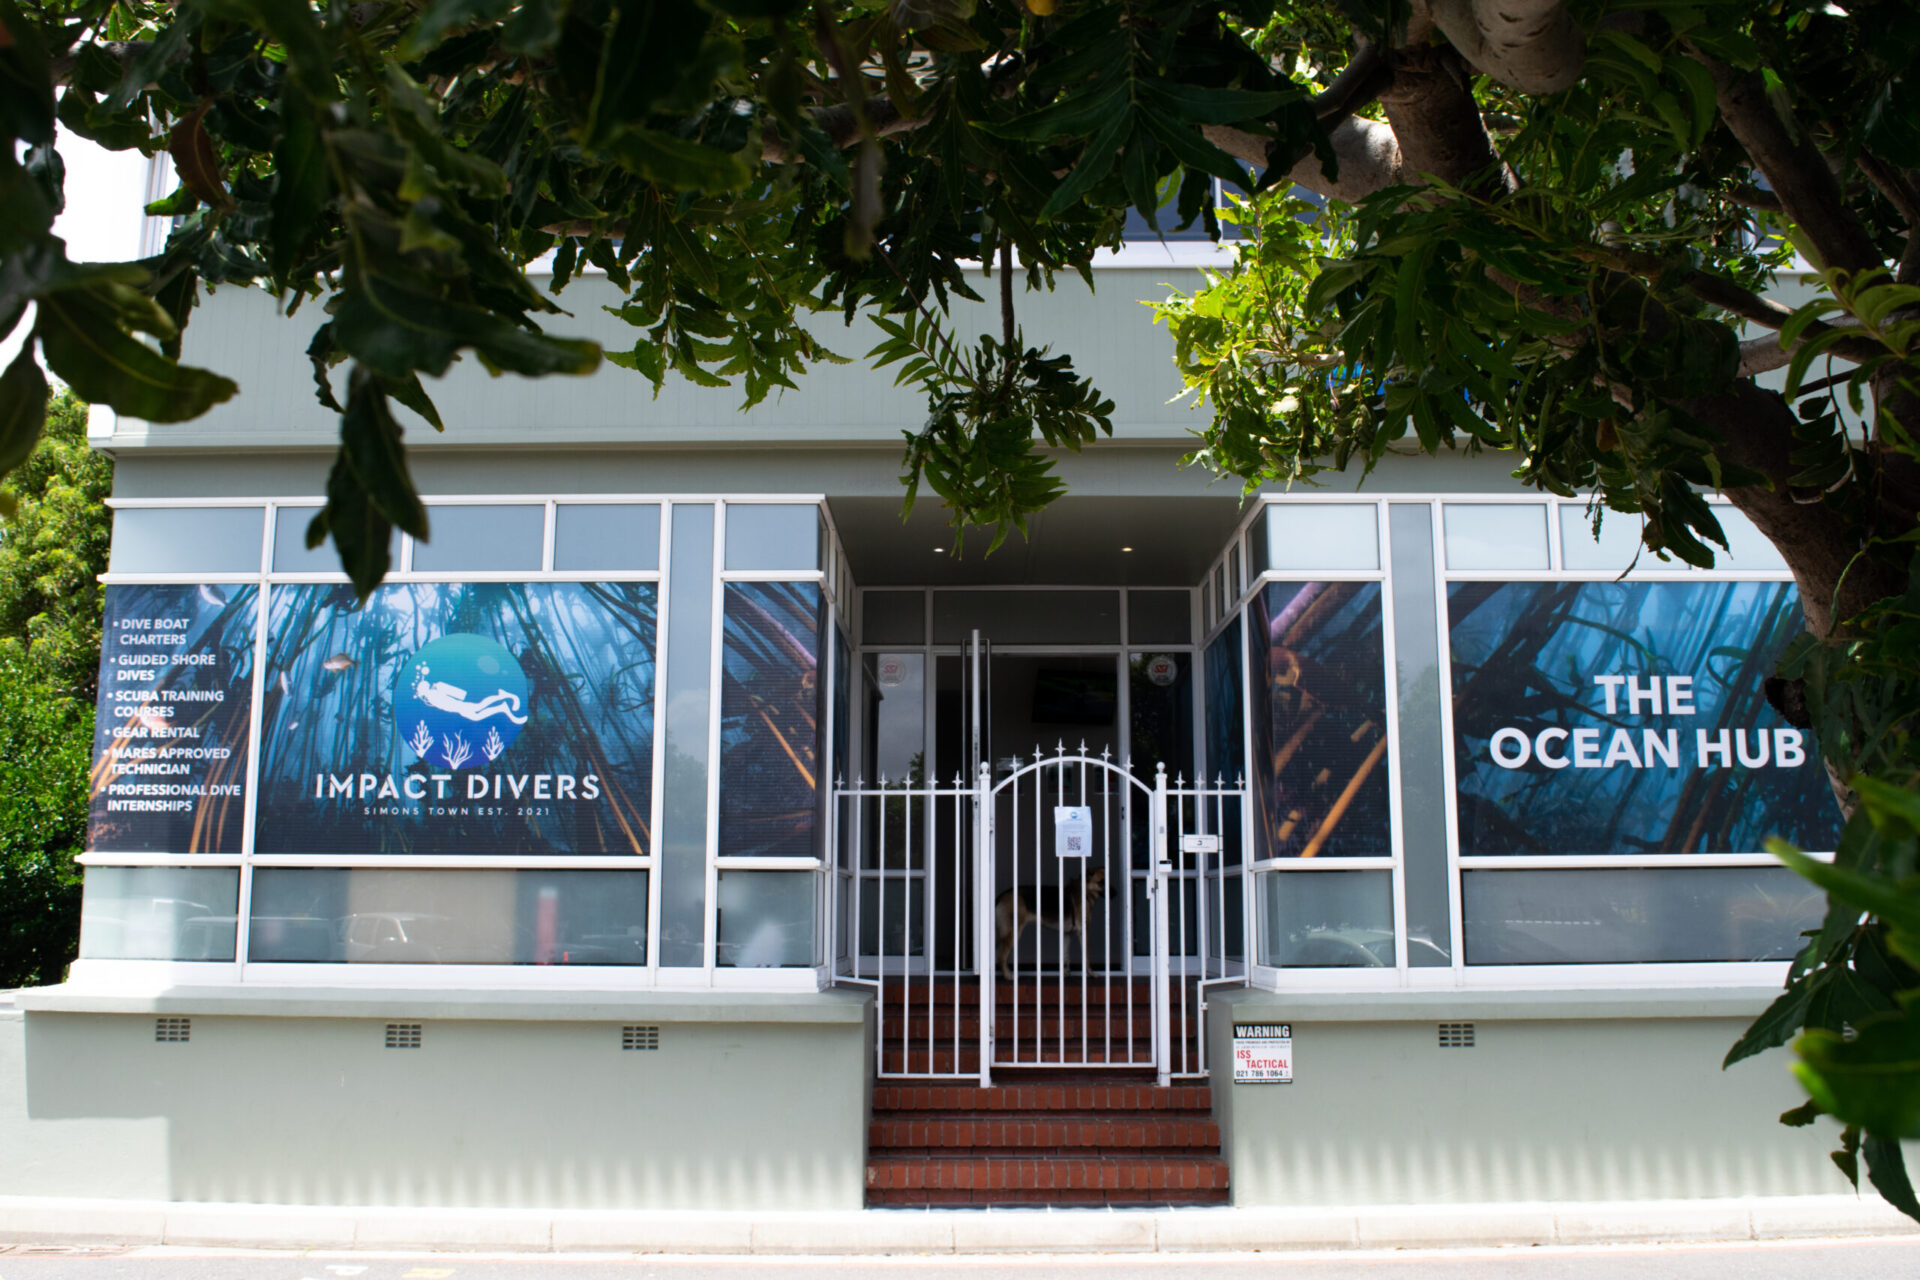 Impact divers an SSI accredited dive center and shop in Simon's Town, Ocean Hub, RADD Divers